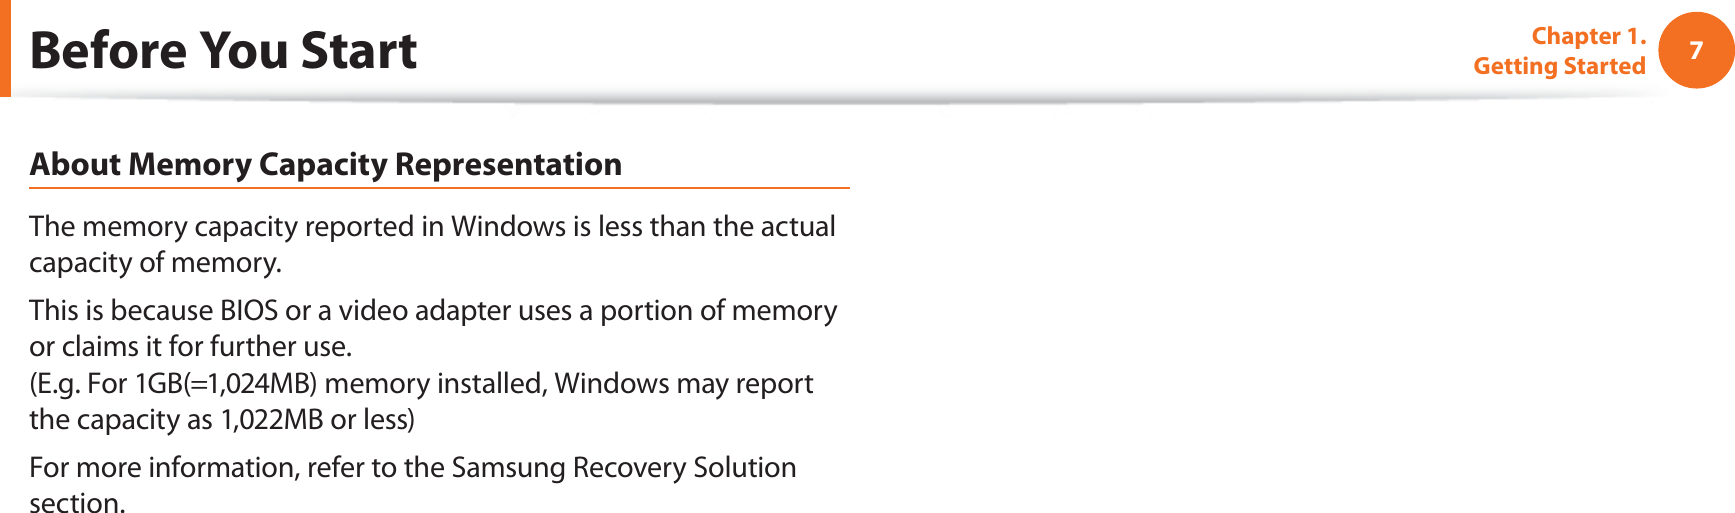 7Chapter 1. Getting StartedAbout Memory Capacity RepresentationThe memory capacity reported in Windows is less than the actual capacity of memory.This is because BIOS or a video adapter uses a portion of memory or claims it for further use. (E.g. For 1GB(=1,024MB) memory installed, Windows may report the capacity as 1,022MB or less)For more information, refer to the Samsung Recovery Solution section.Before You Start